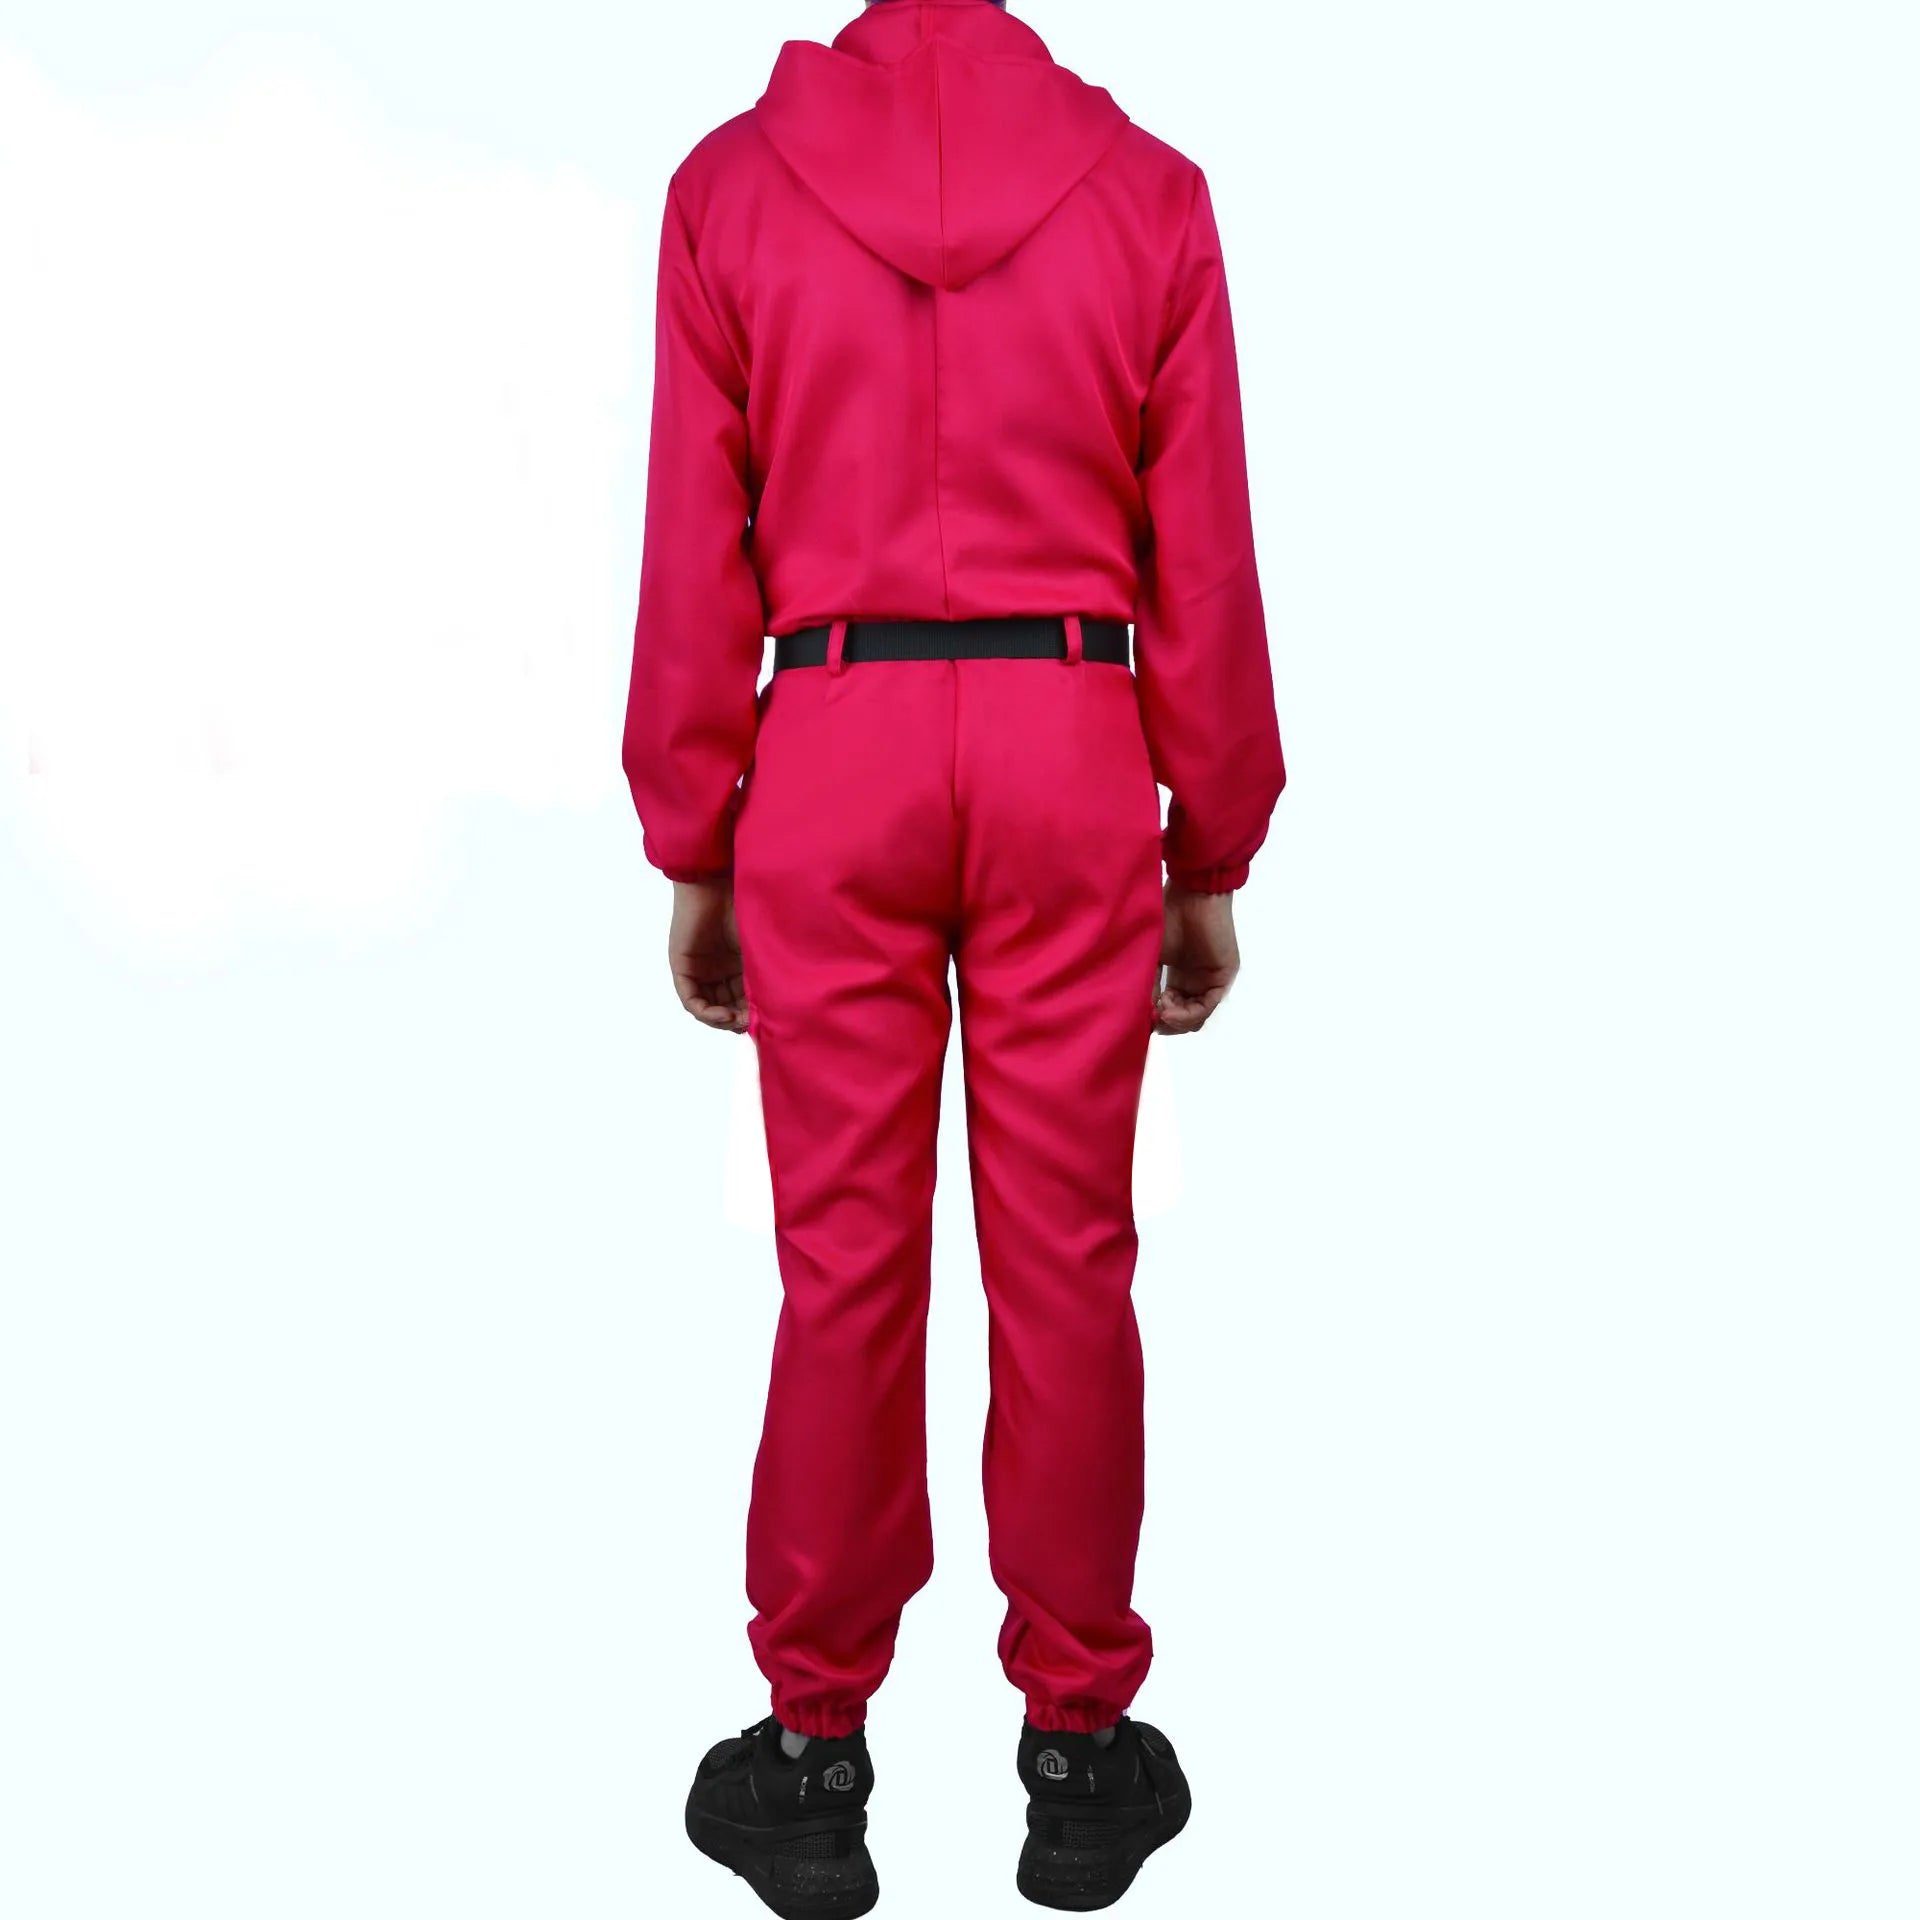 Squid Game Netflix Show Red Cosplay Costume Outfit